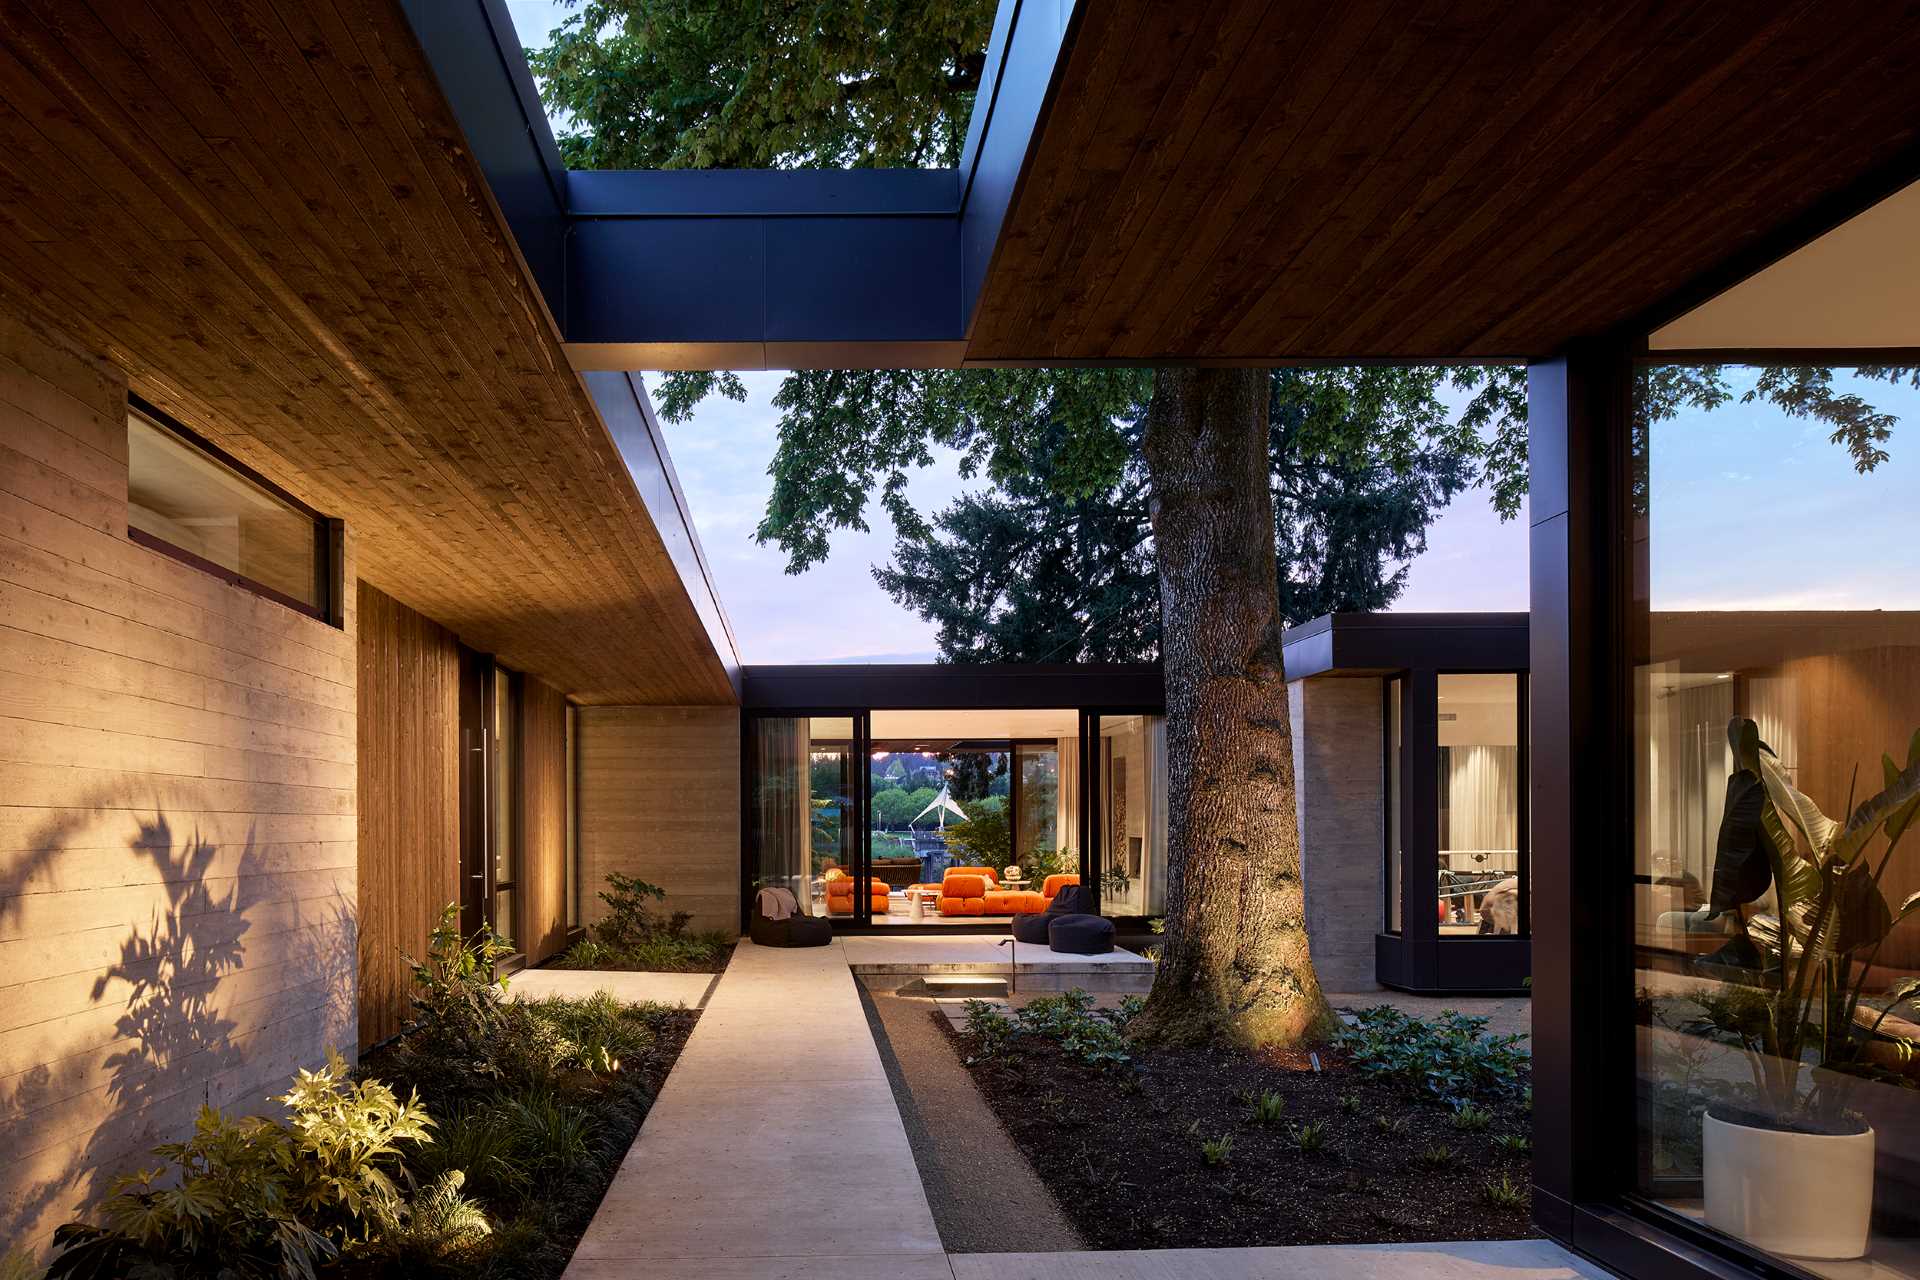 Materials like cedar, aluminum, and board-formed concrete are featured in the home's exterior materials.